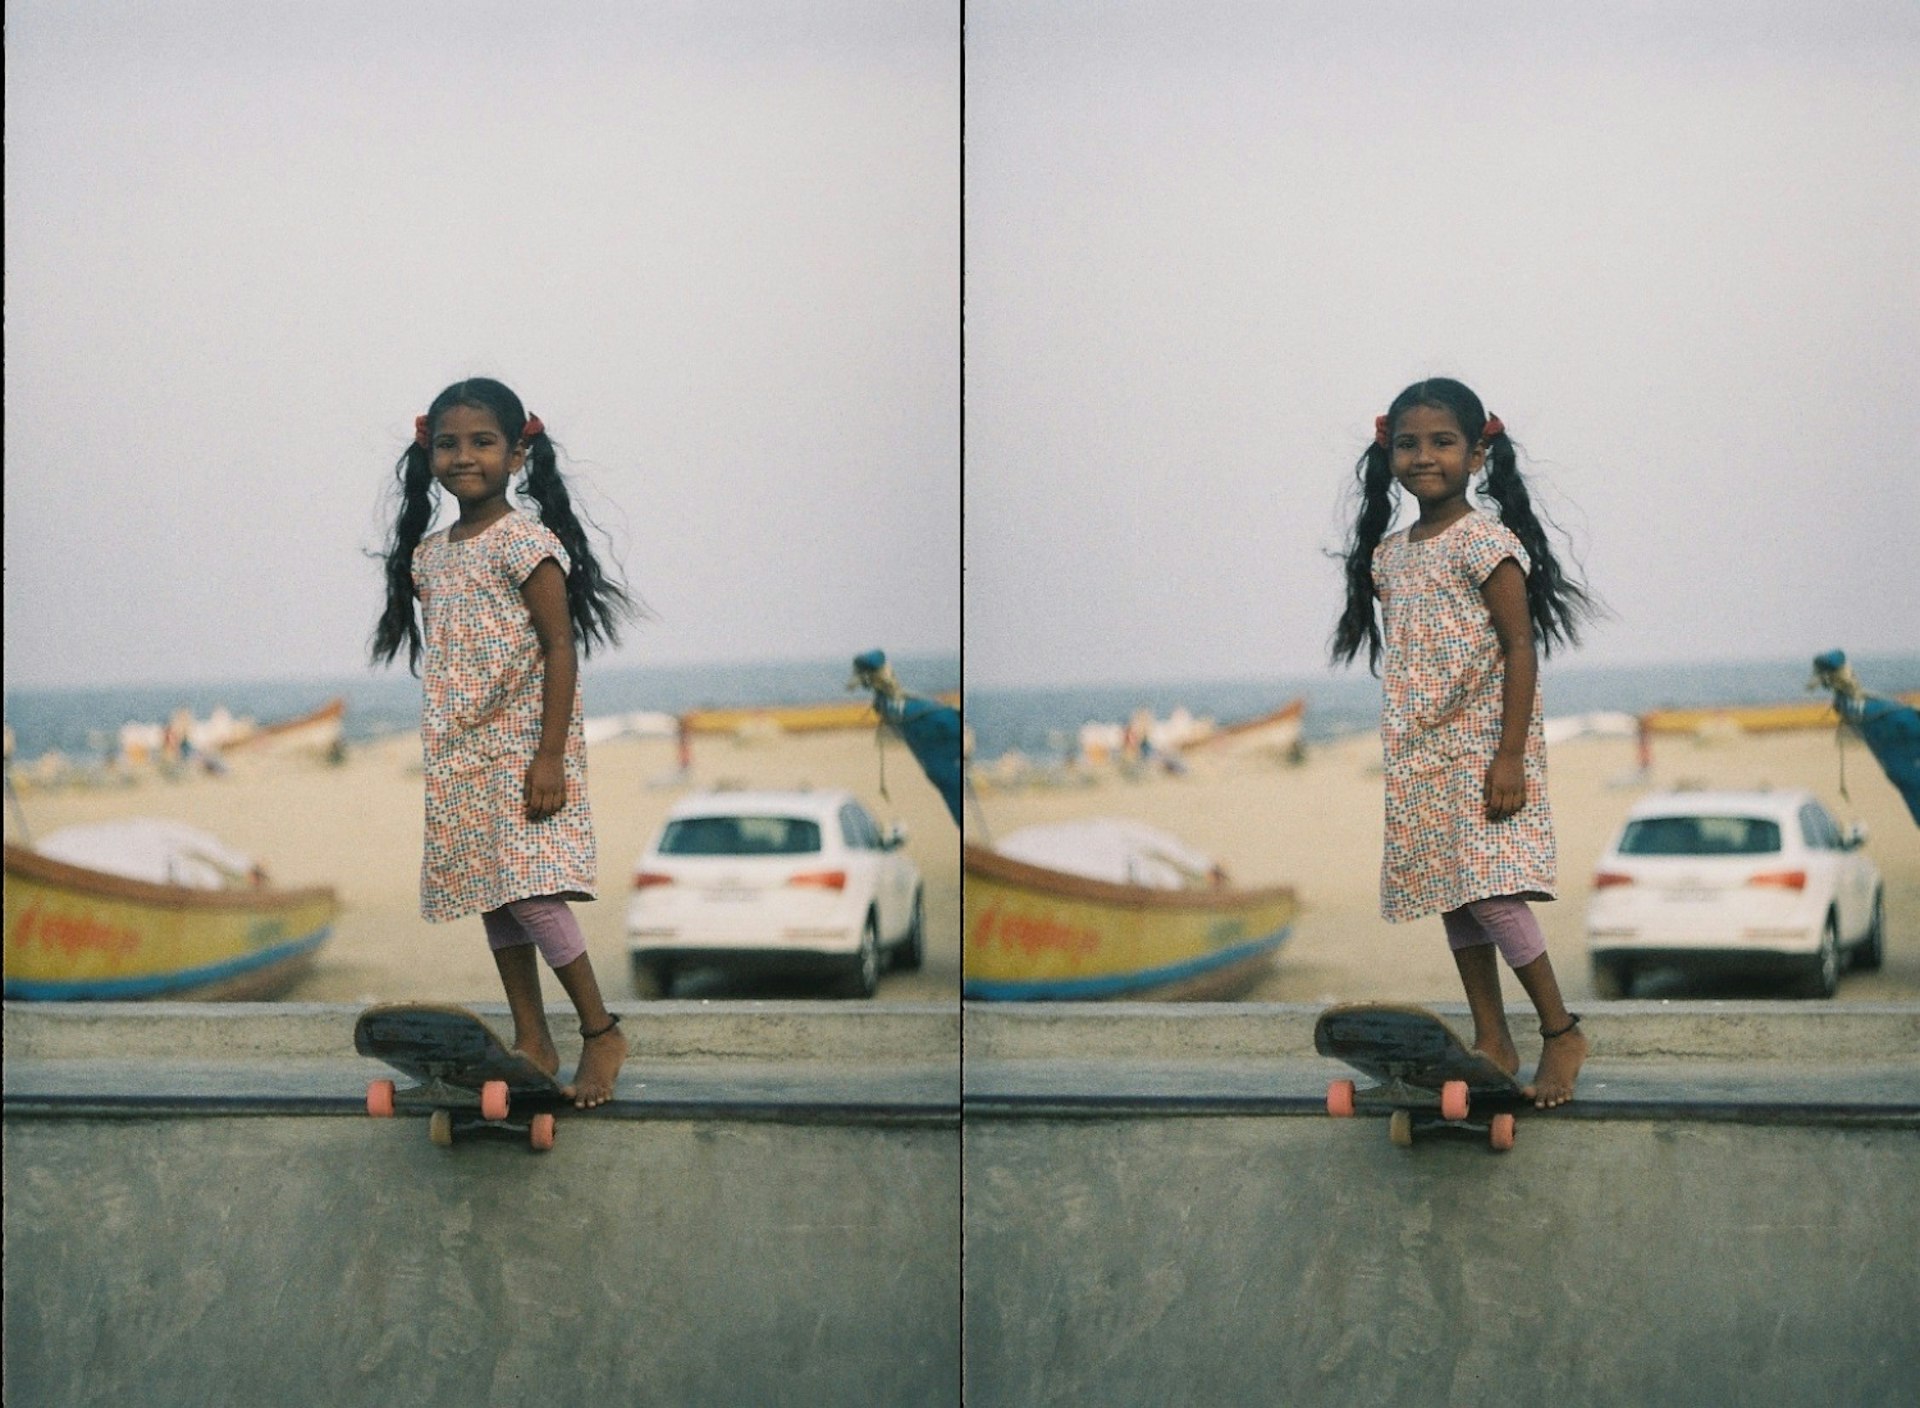 The young skateboarder smashing stereotypes in India